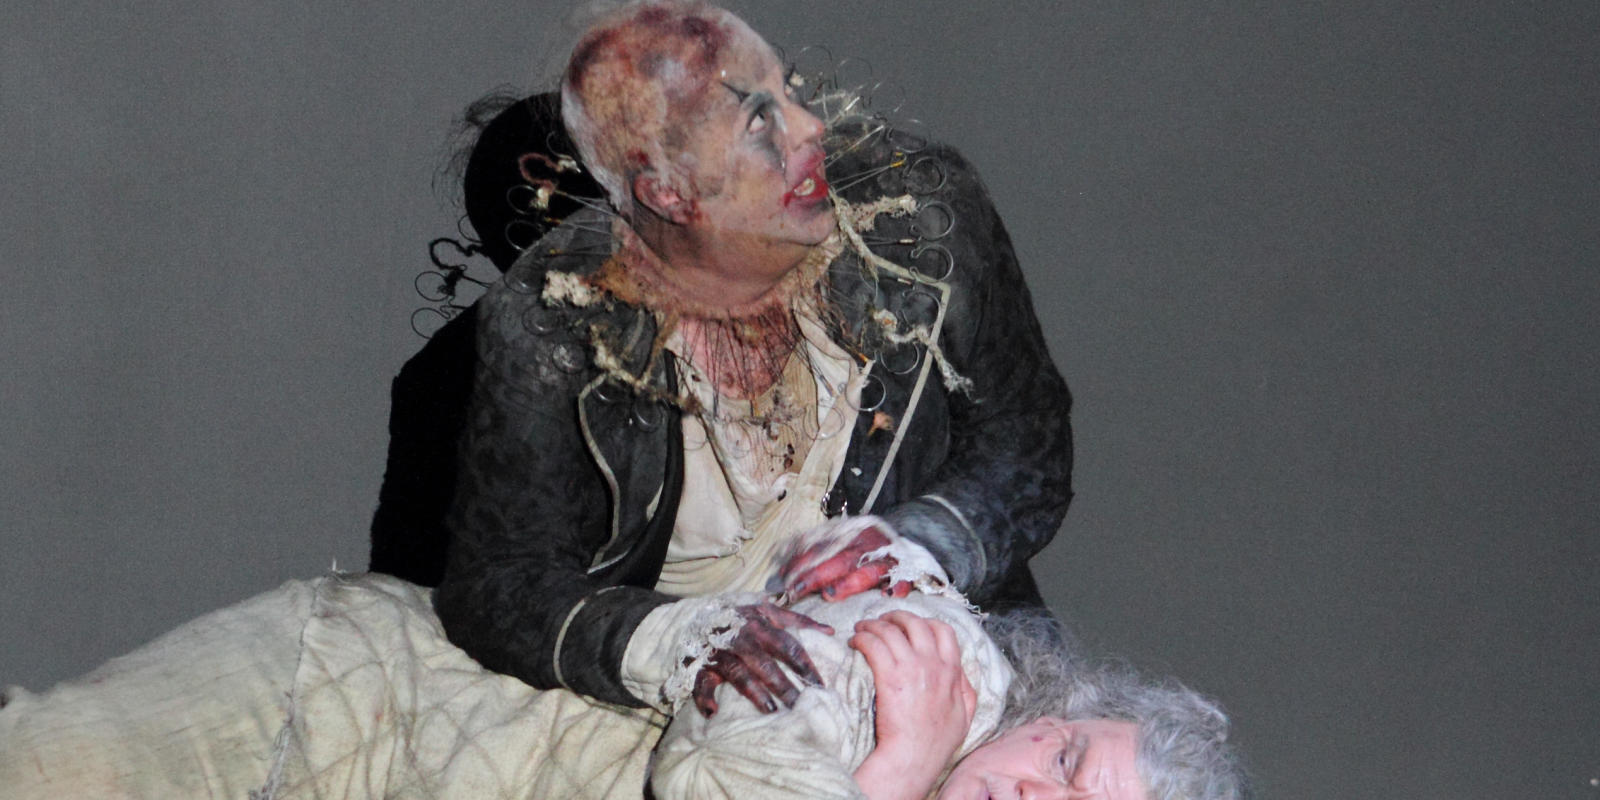 craig colclough and stuart skelton performing on stage in tristan and isolde